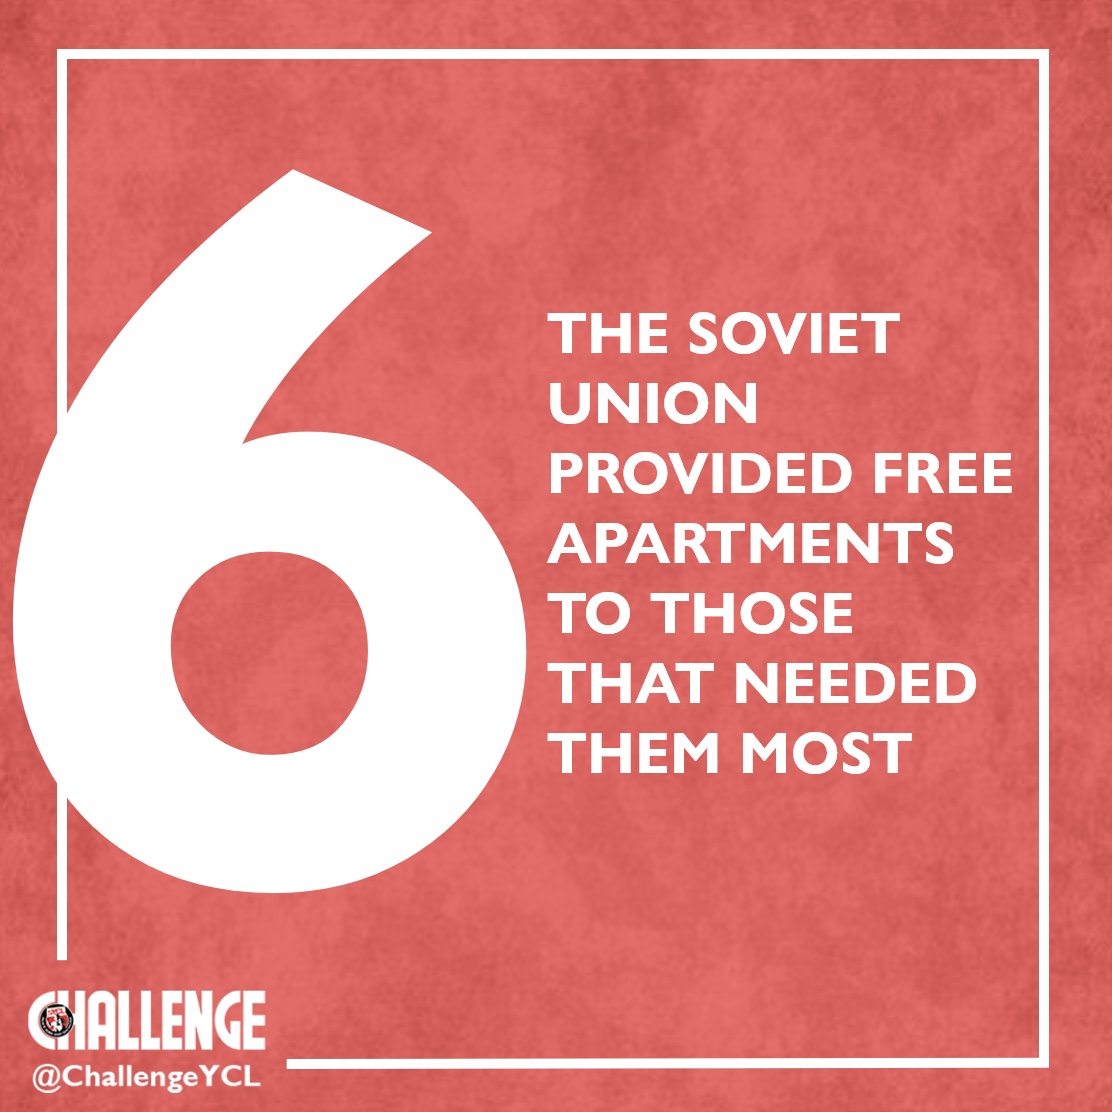 It’s often claimed that socialism leads to poverty, starvation & lack of rights. But socialism in the USSR introduced new liberties previously unheard of anywhere in the world. Here’s 10 things that the USSR offered to their citizens before any other country. 